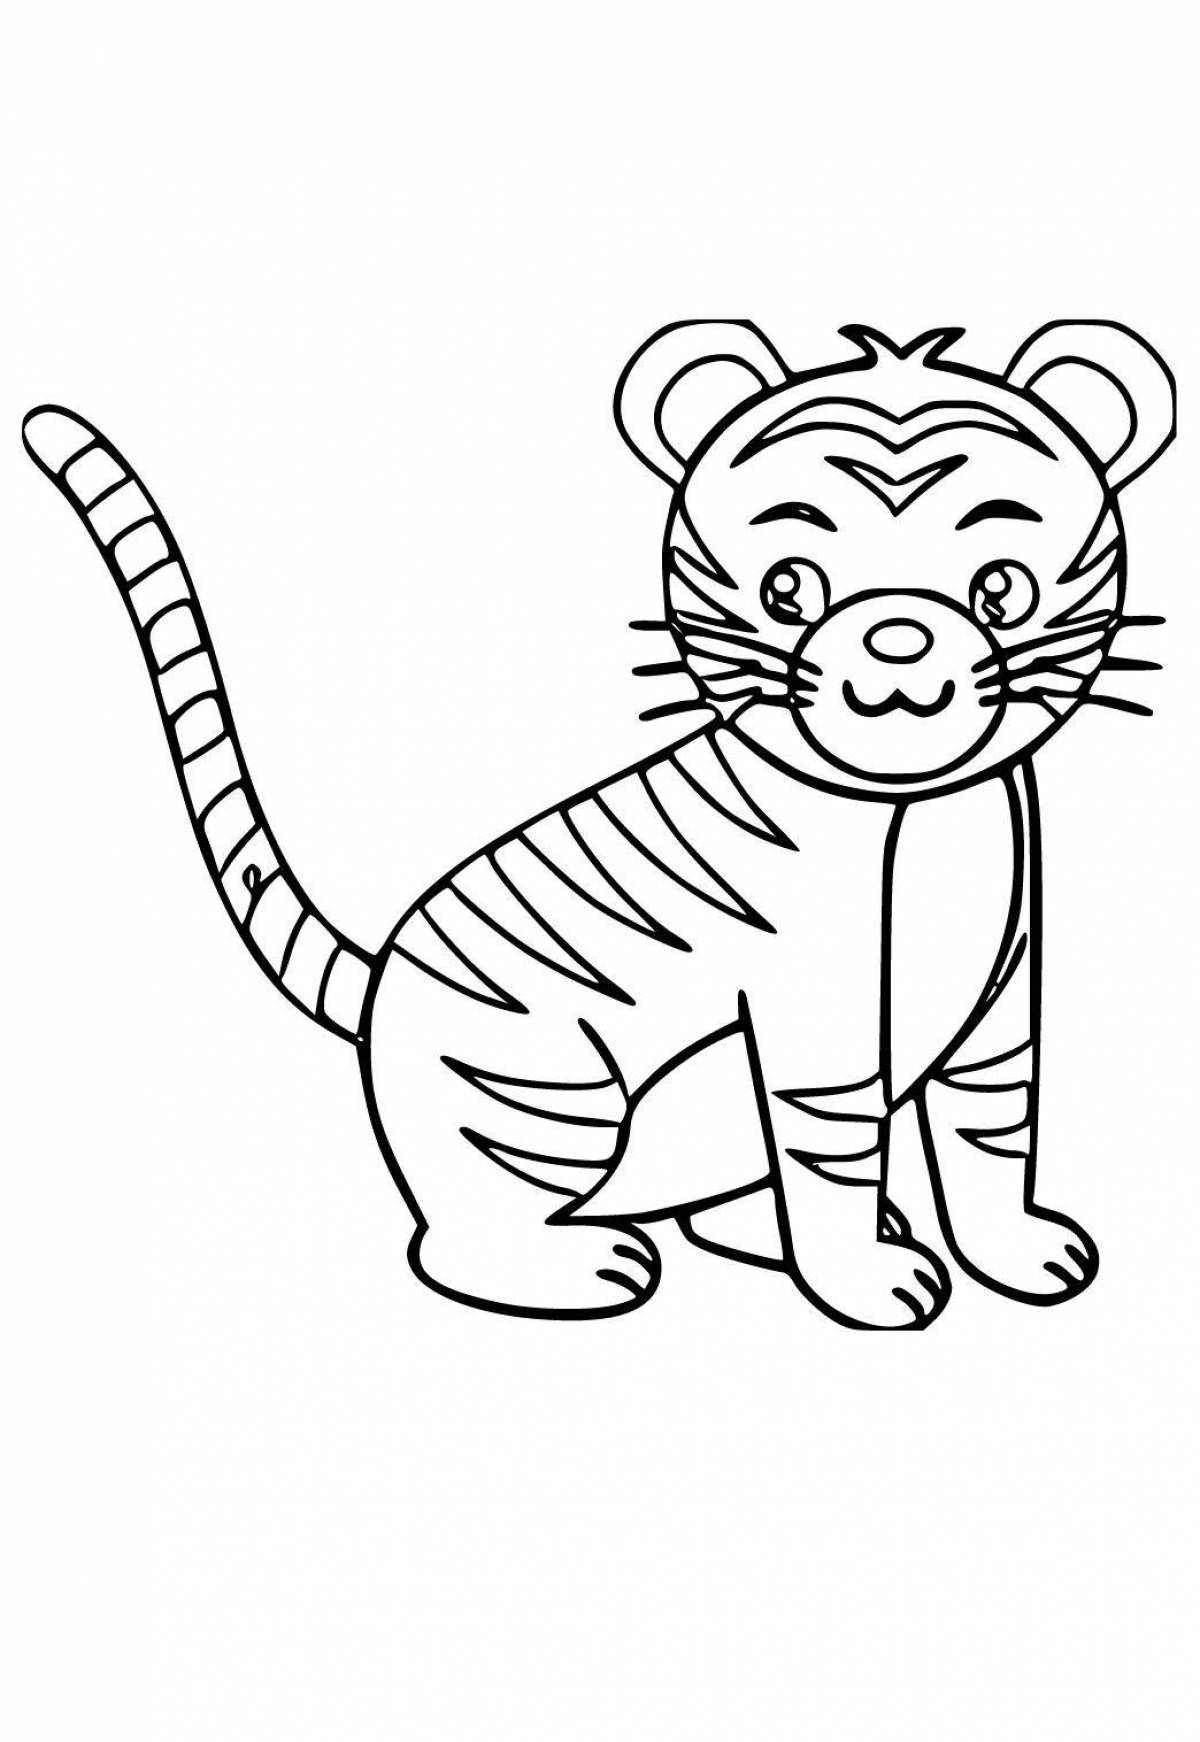 Fancy tiger coloring book for kids